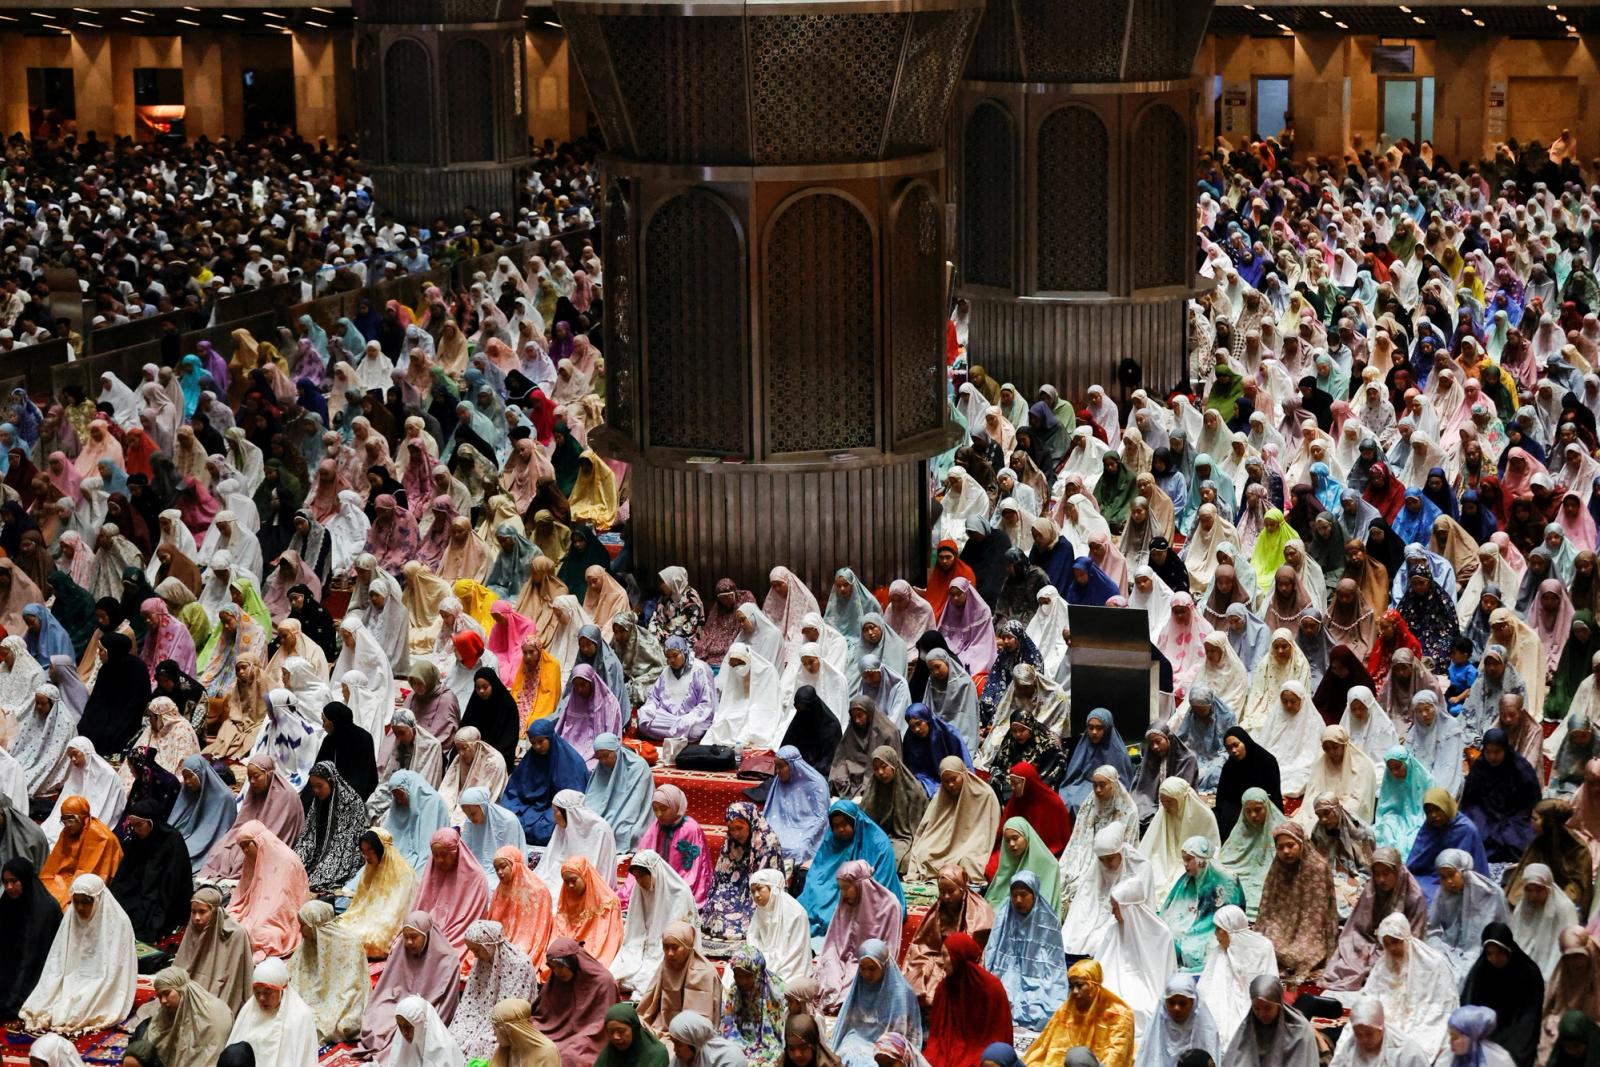 Muslim women attend mass prayers known as 'Tarawih' during the first evening of holy fasting month of Ramadan at the Great Mosque of Istiqlal in Jakarta, Indonesia, March 22, 2023. REUTERS/Willy Kurniawan TPX IMAGES OF THE DAY